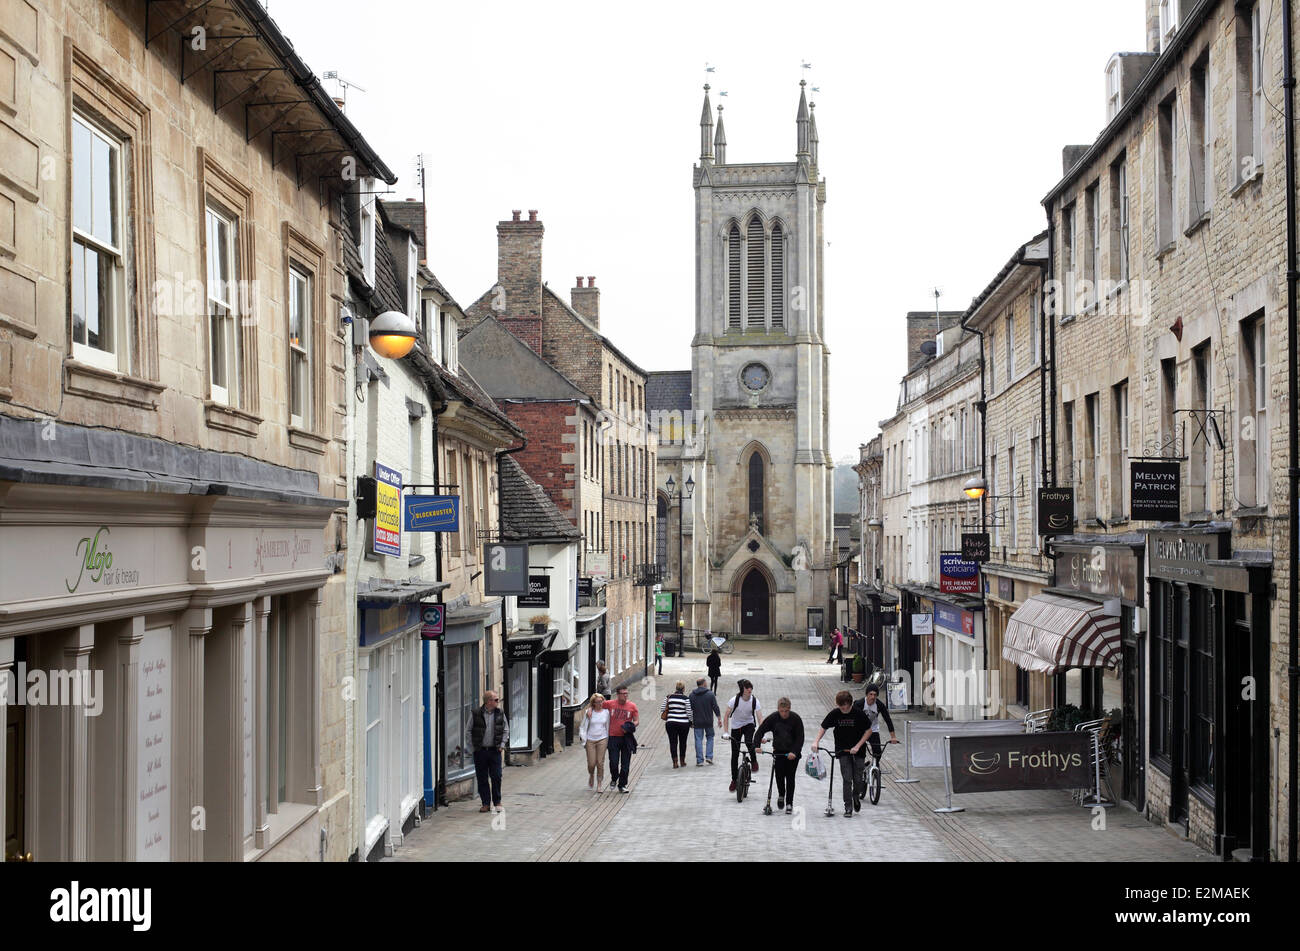 Iron-monger Street, Stamford, Lincolnshire. Looking towards St Michael’s Church. Stock Photo